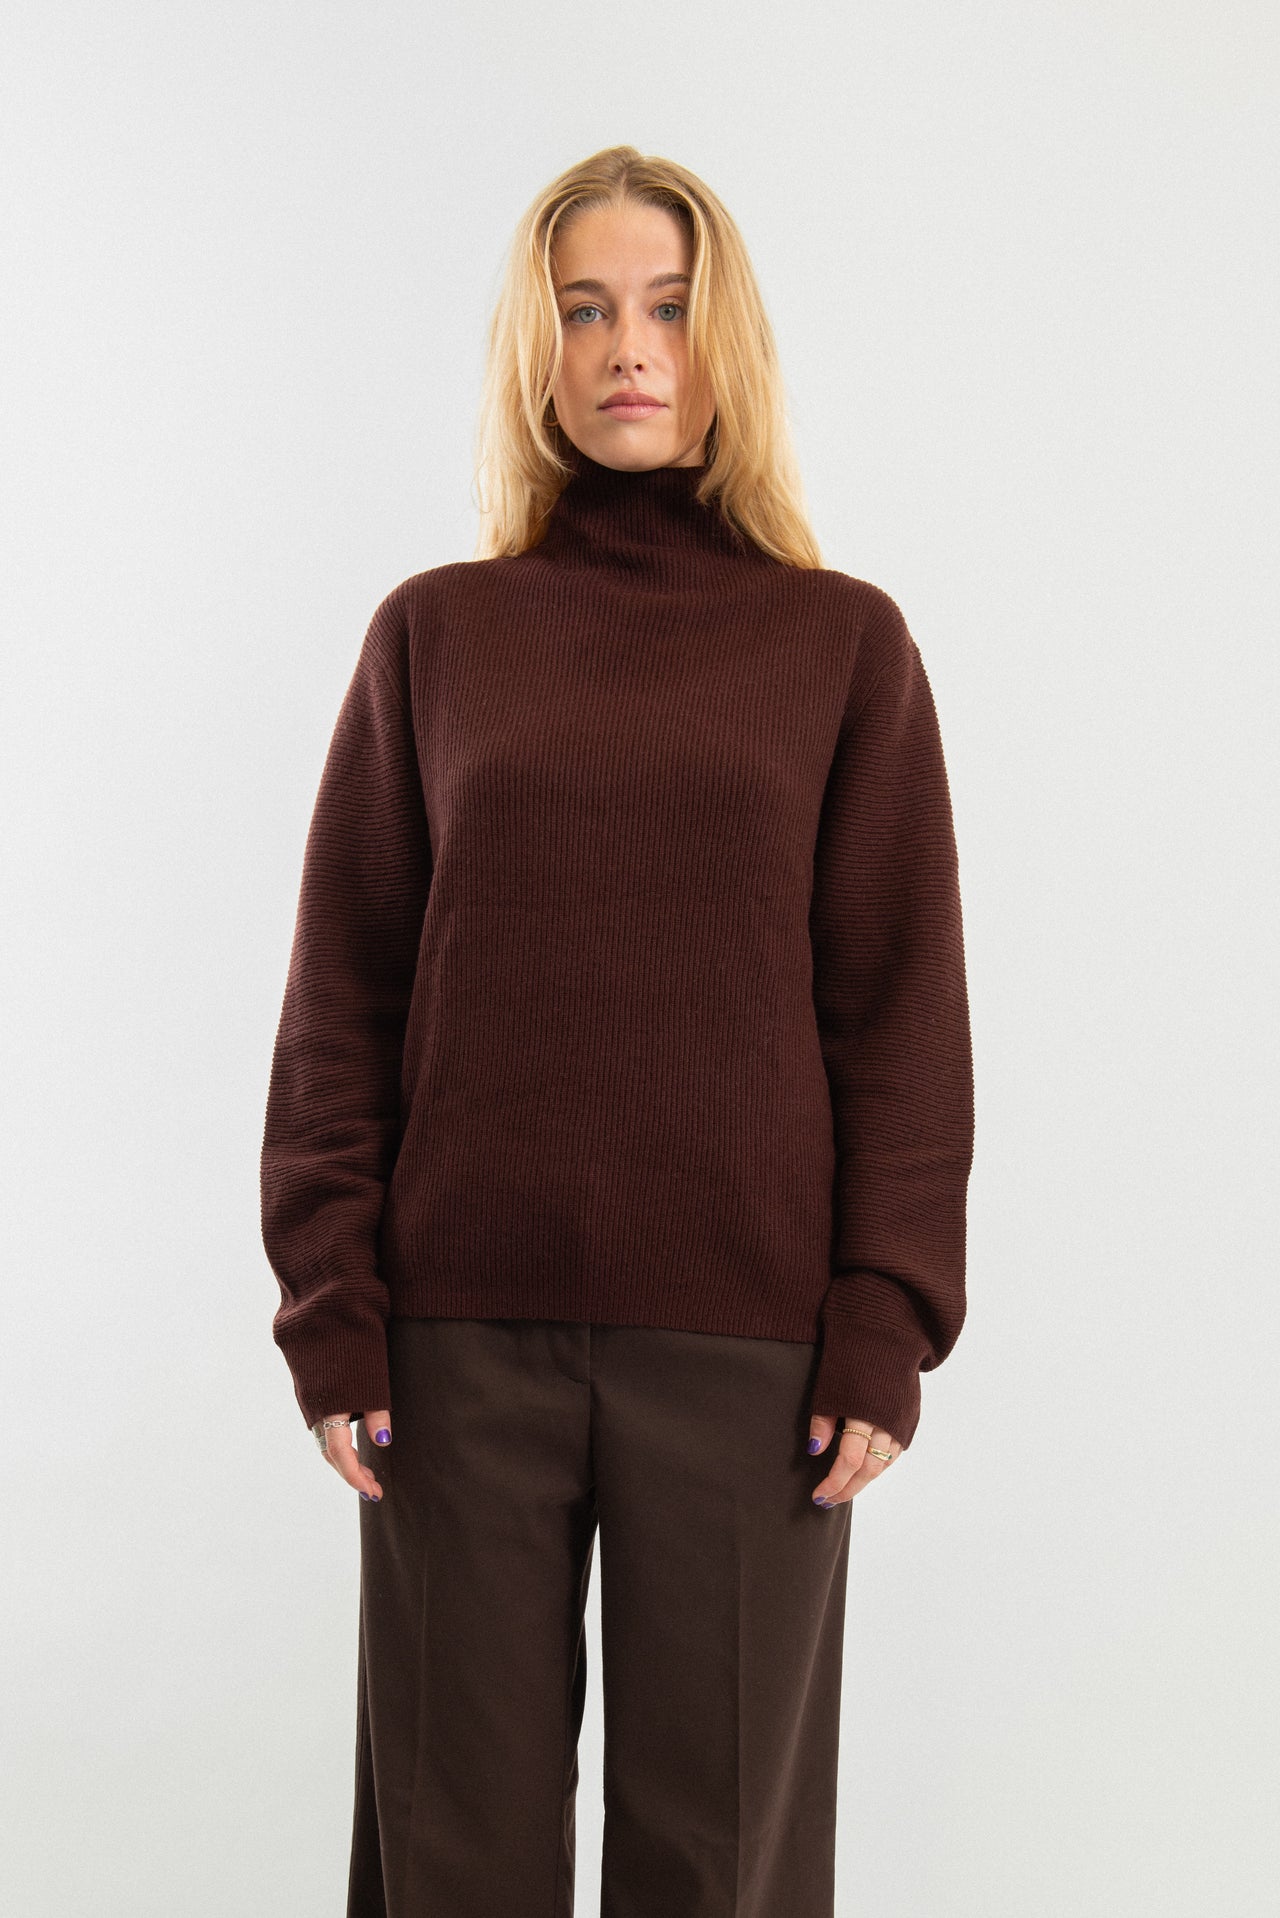 Wool and Cashmere blend sweater with a stand up collar